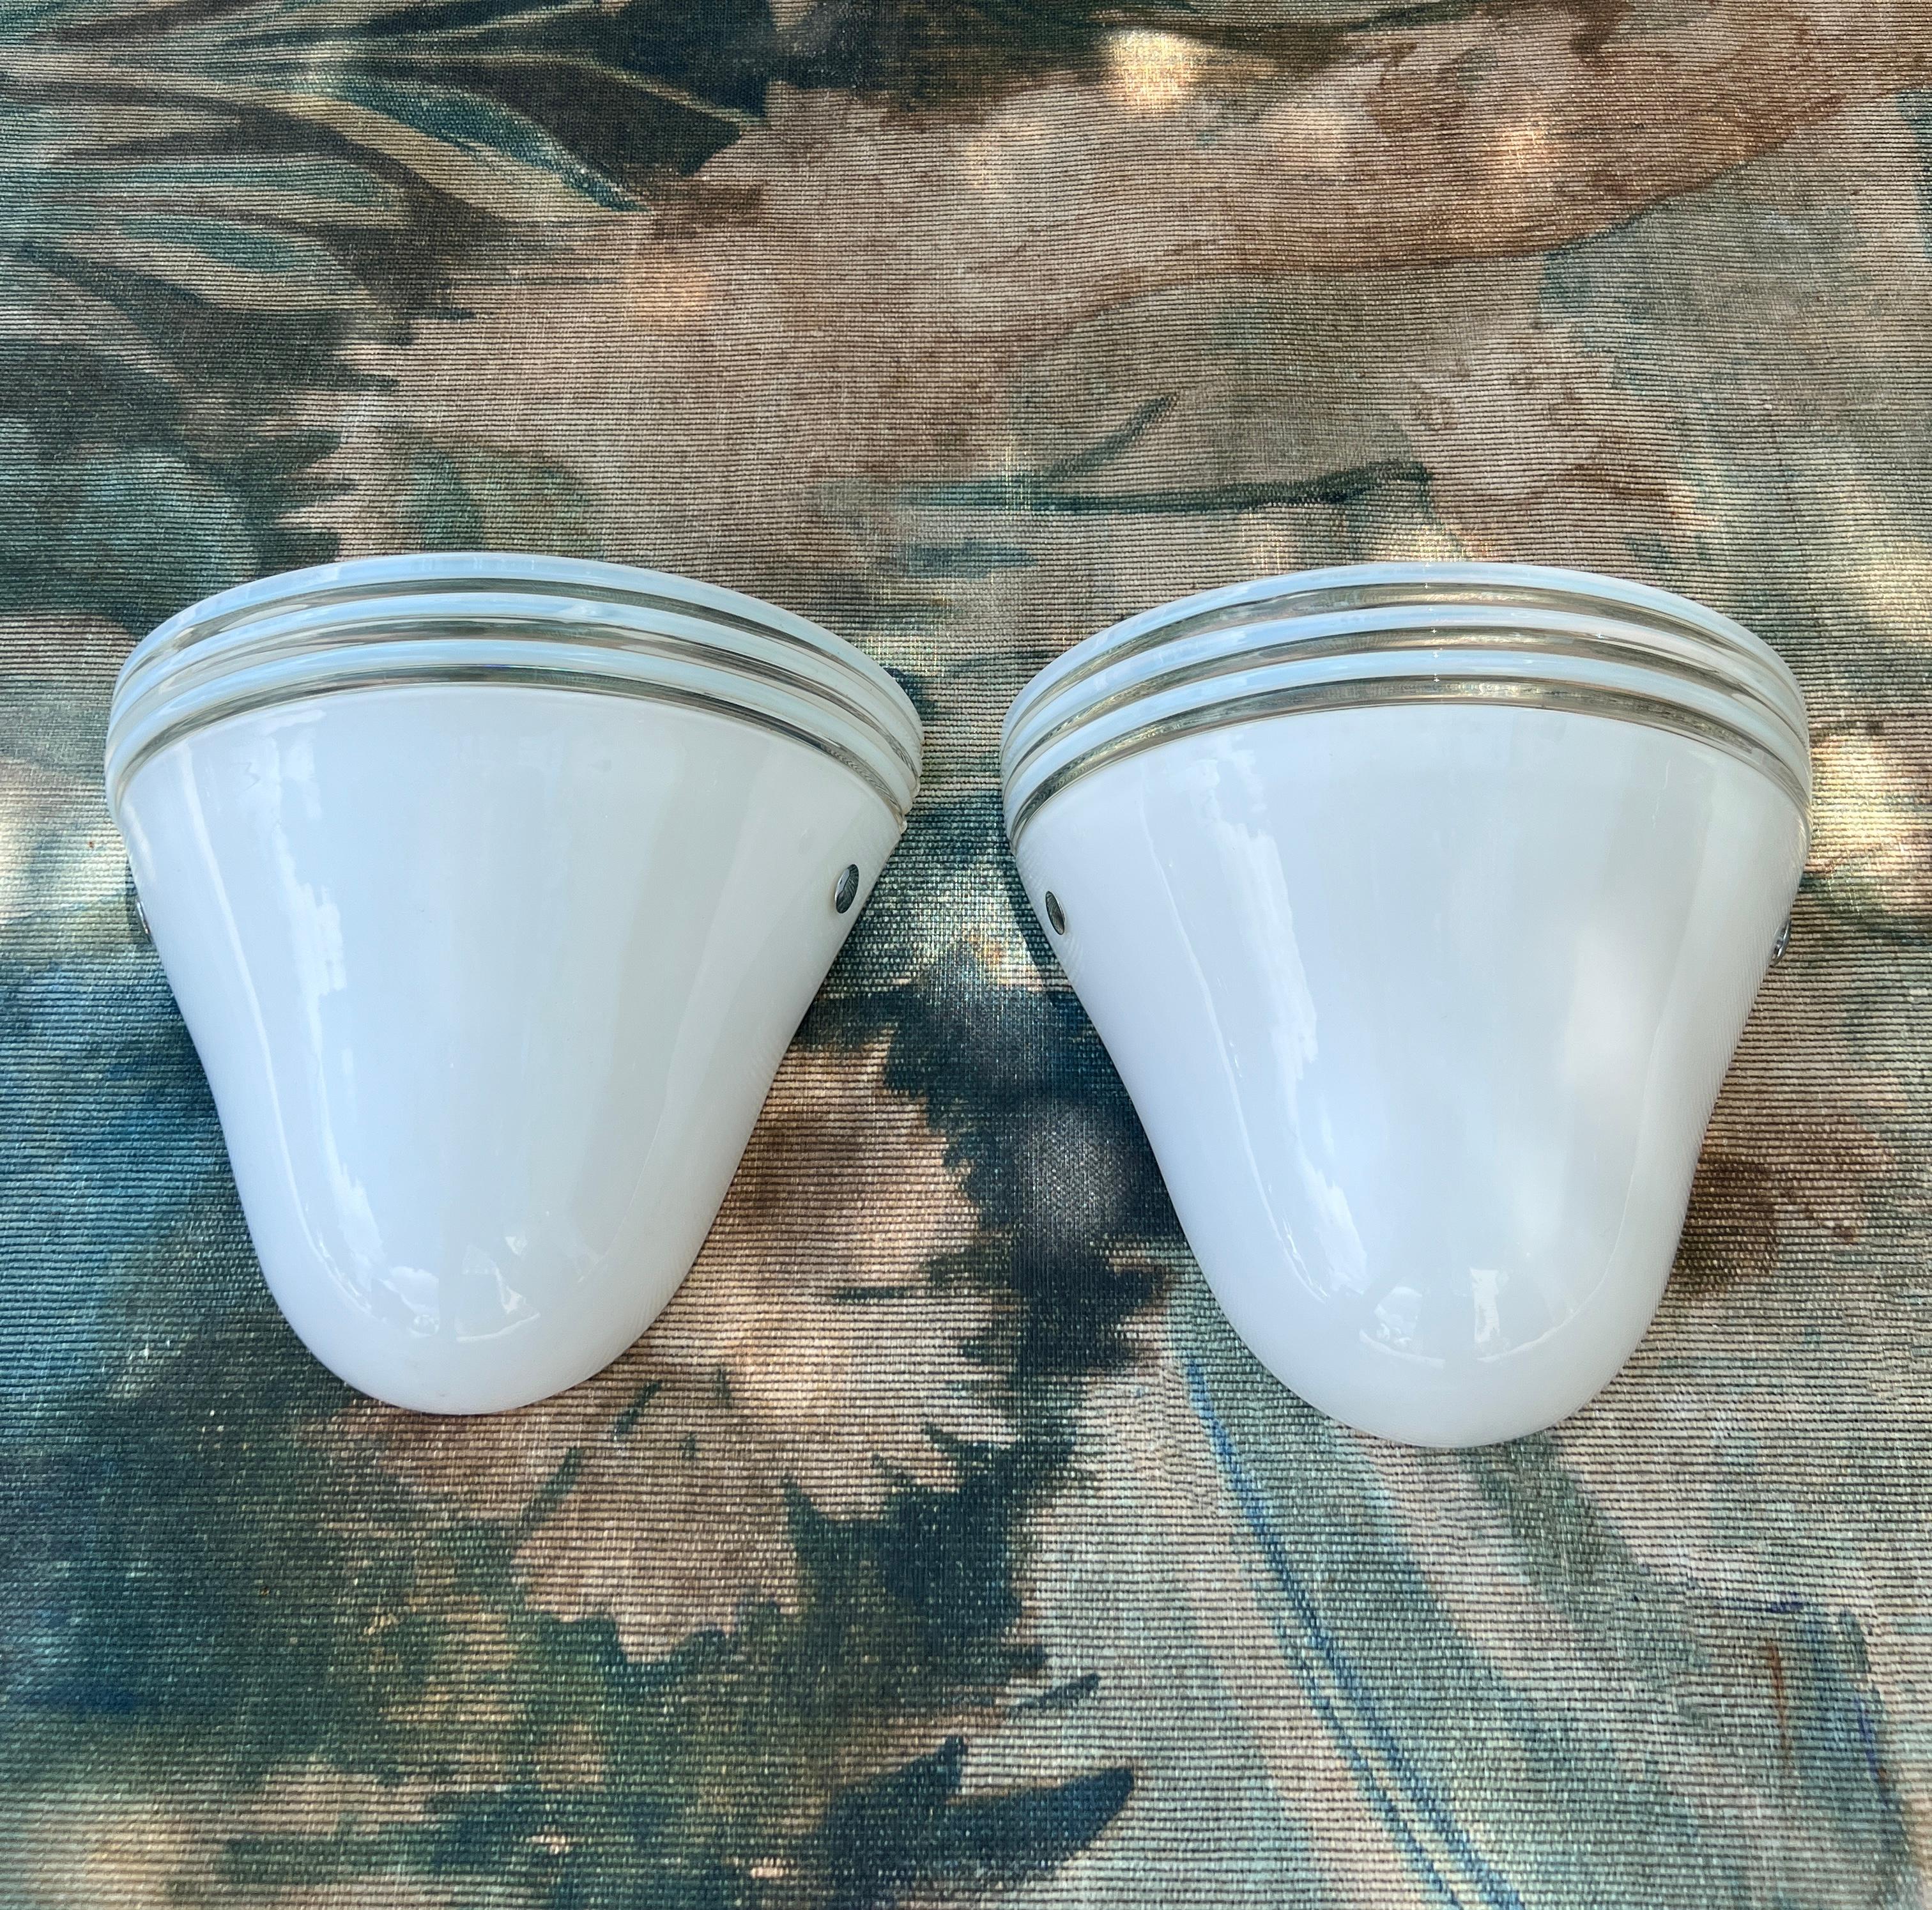 Italian Pair of Mid-Century Modern White Murano Glass Sconces by Leucos, c. 1970s For Sale